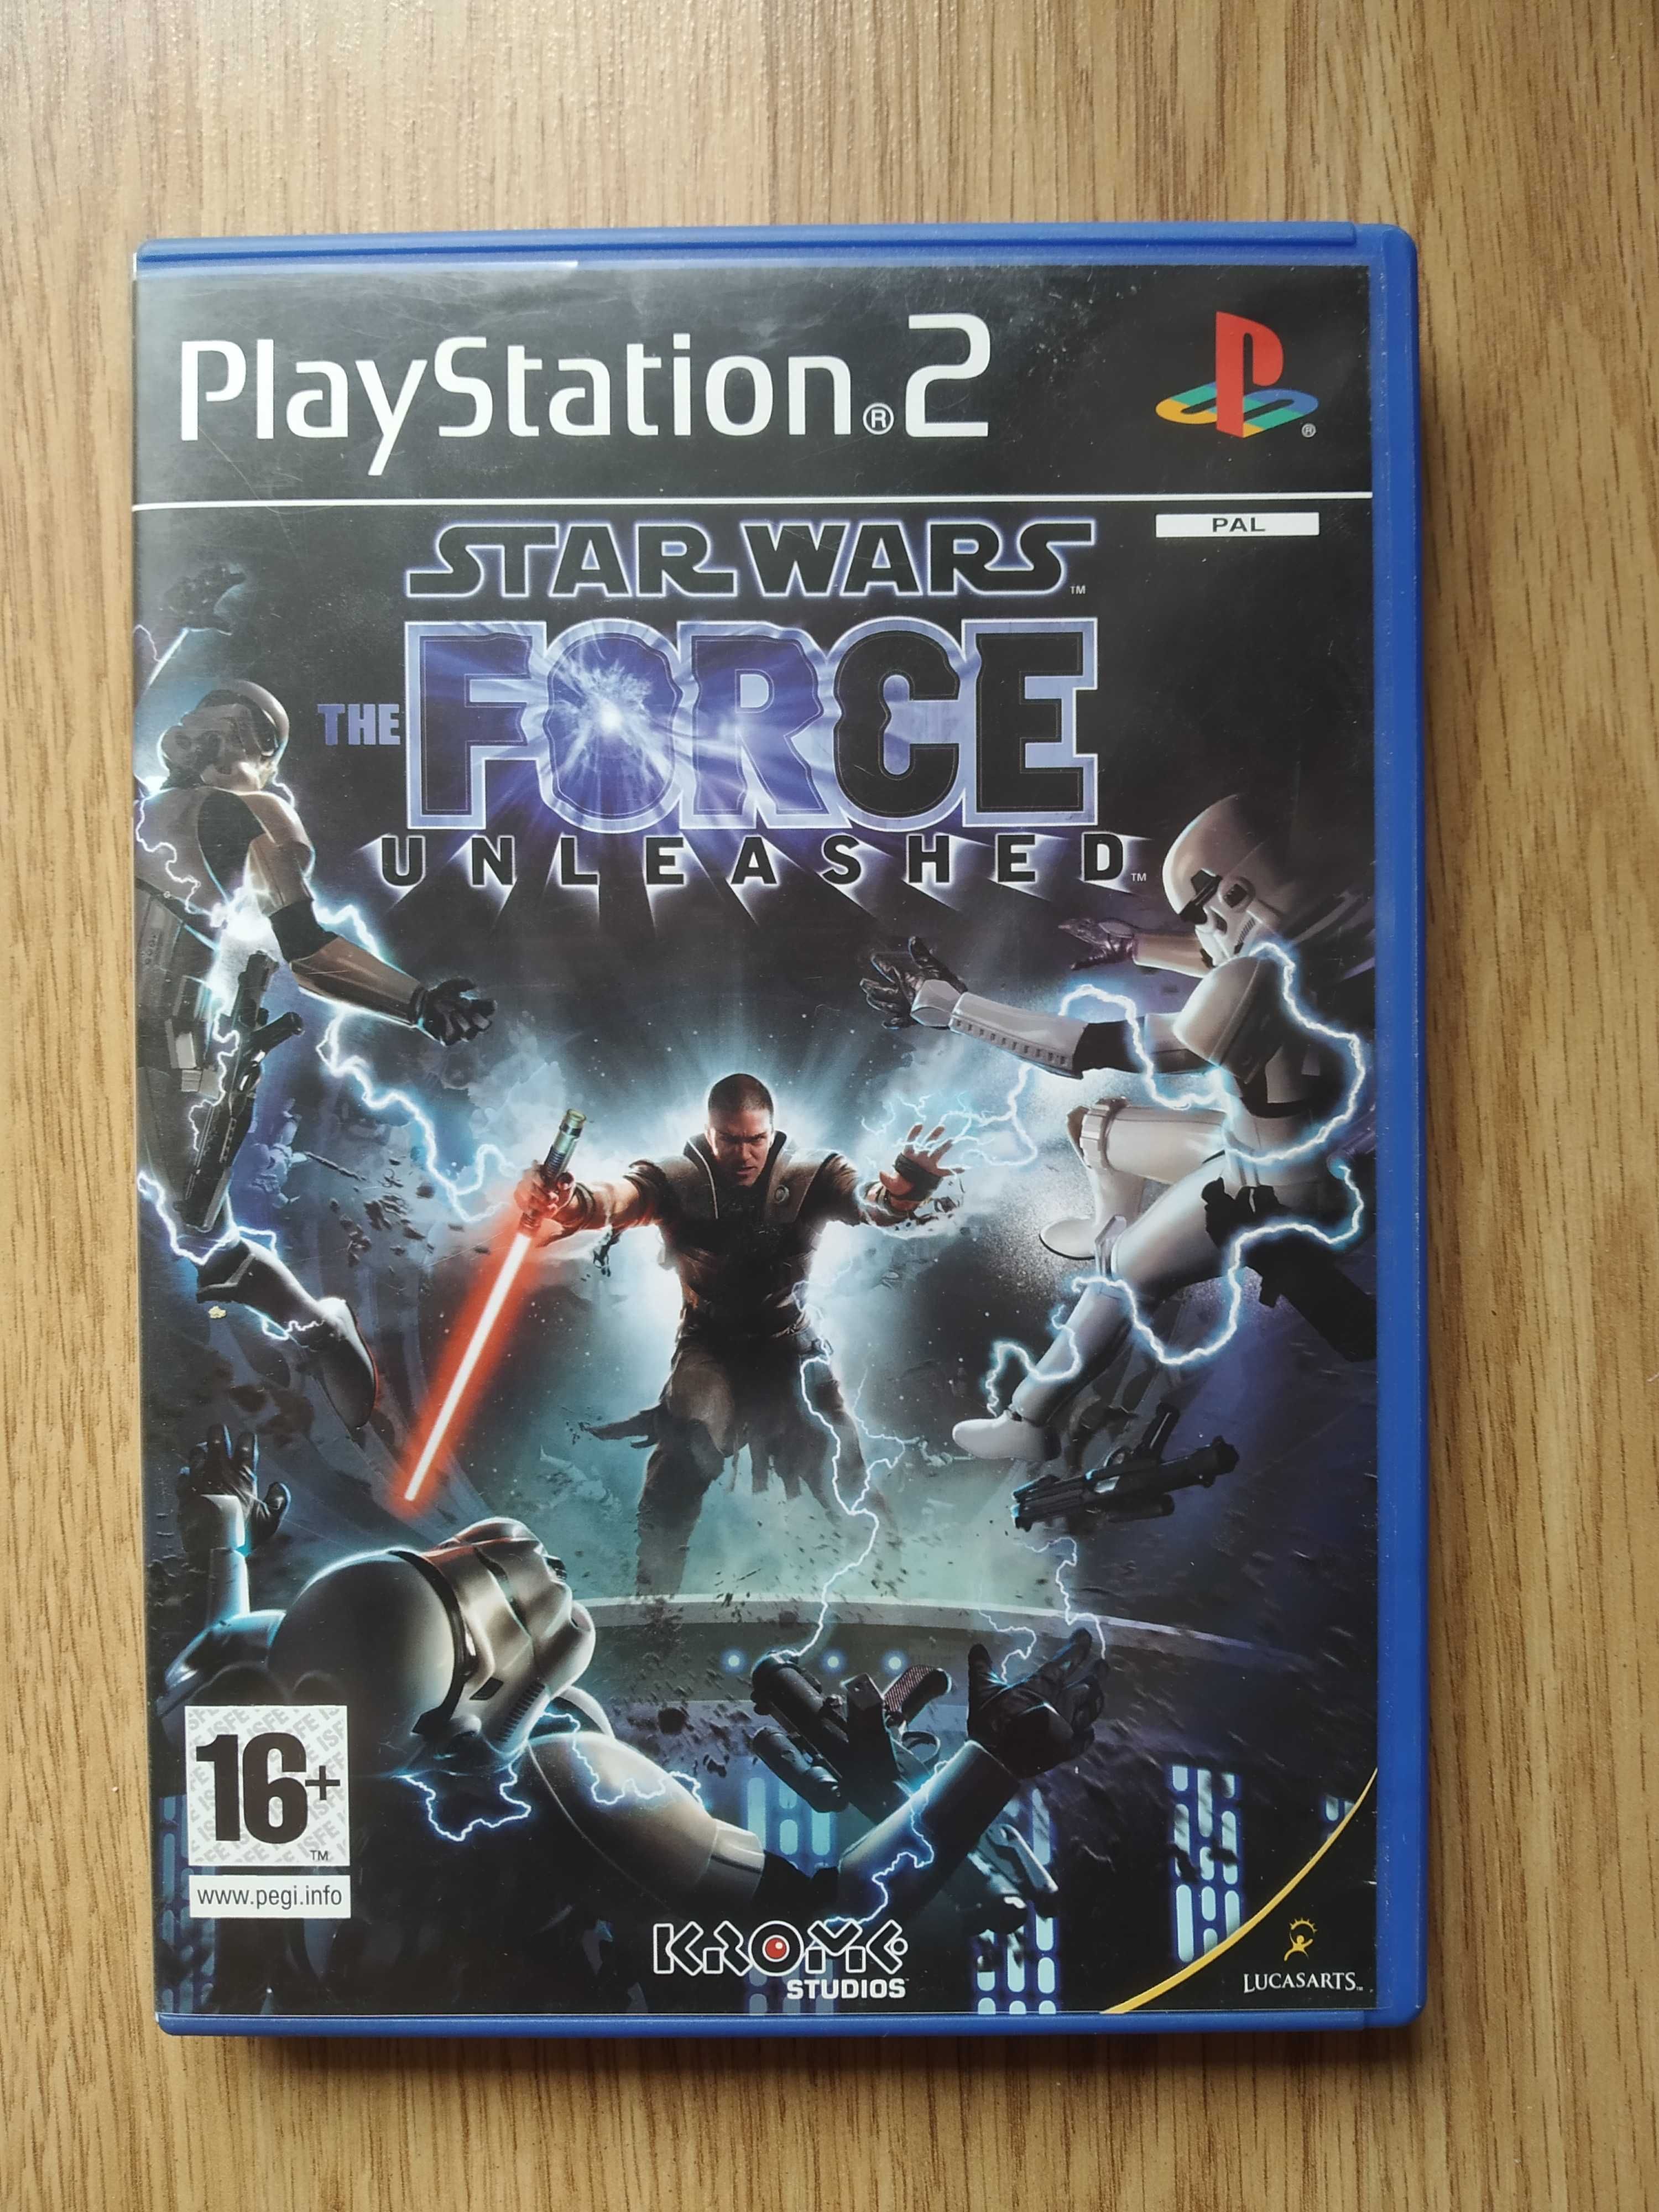 Star Wars the force unleashed PS2